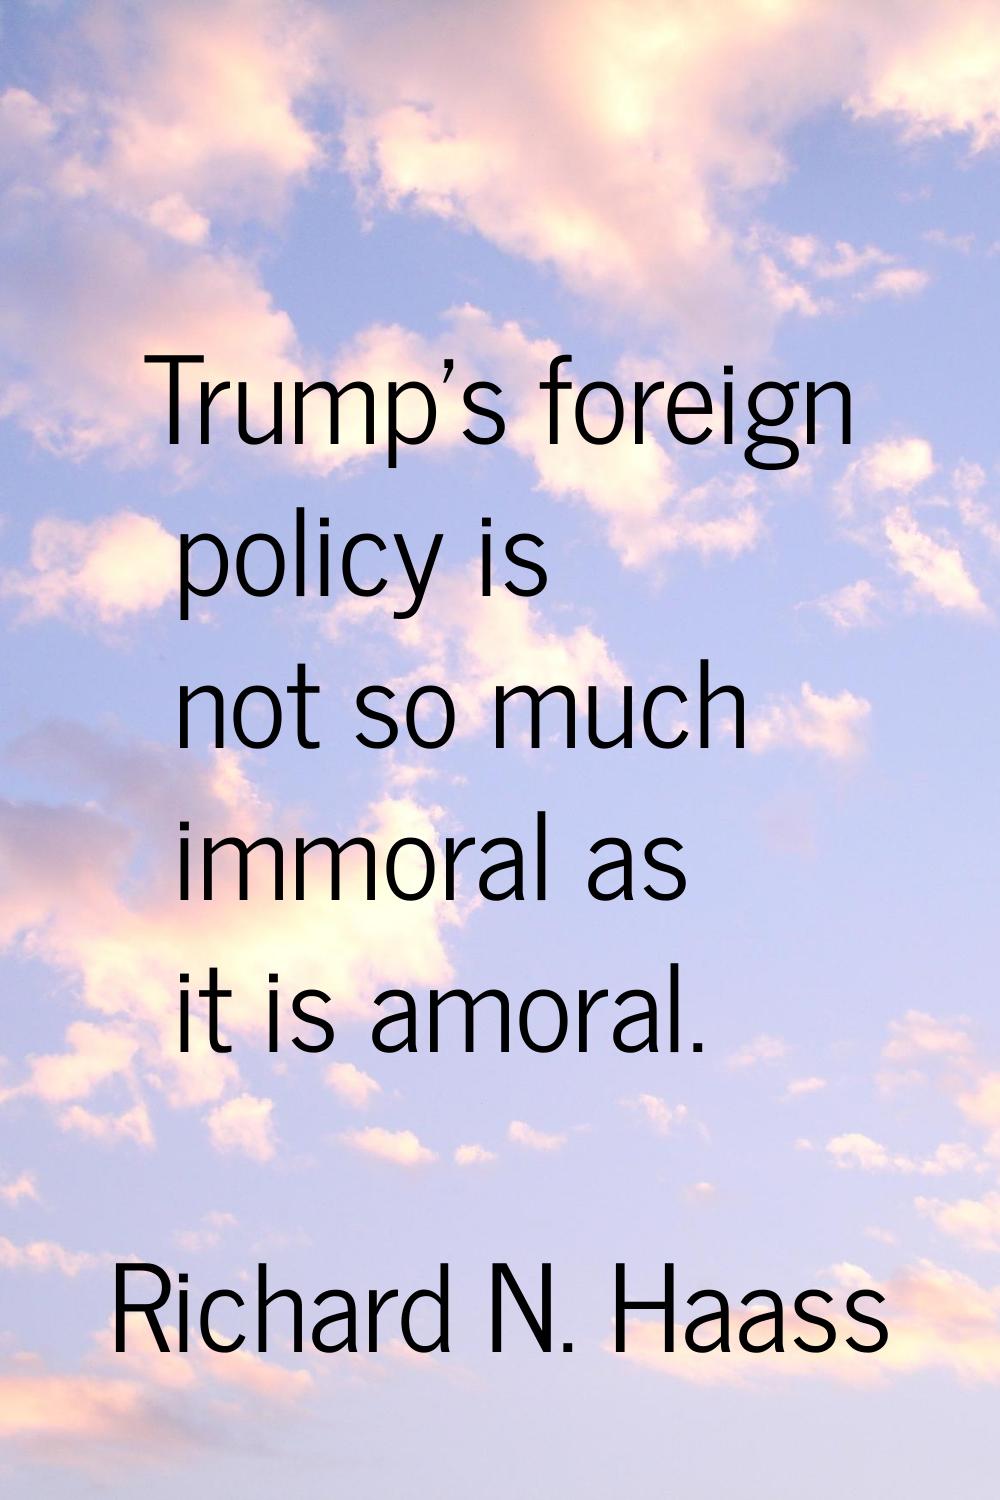 Trump's foreign policy is not so much immoral as it is amoral.